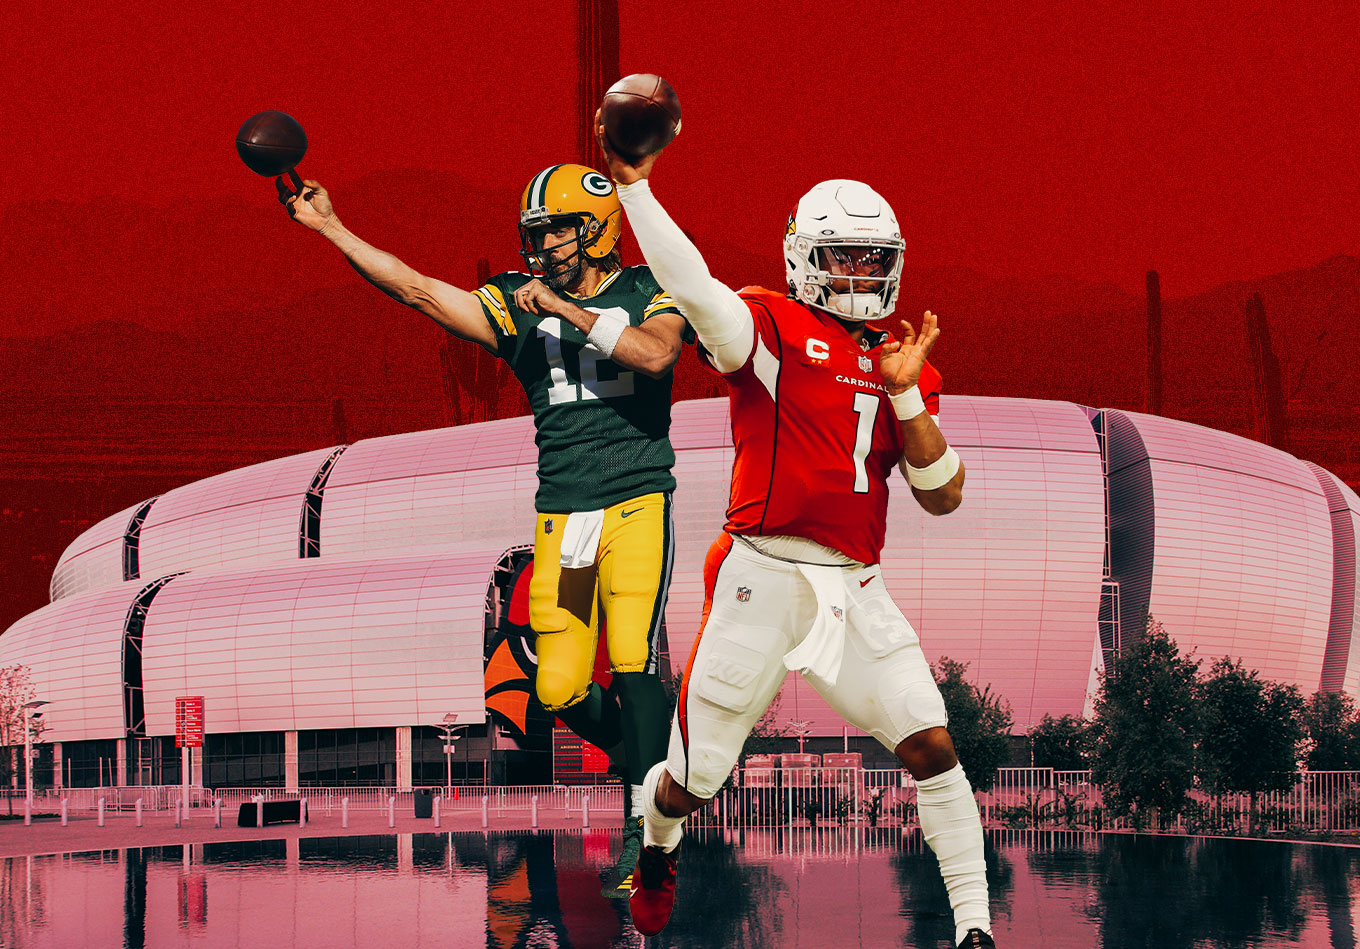 TNF Showdown: What It’ll Take for the Packers to End the Cardinals’ Unbeaten Run